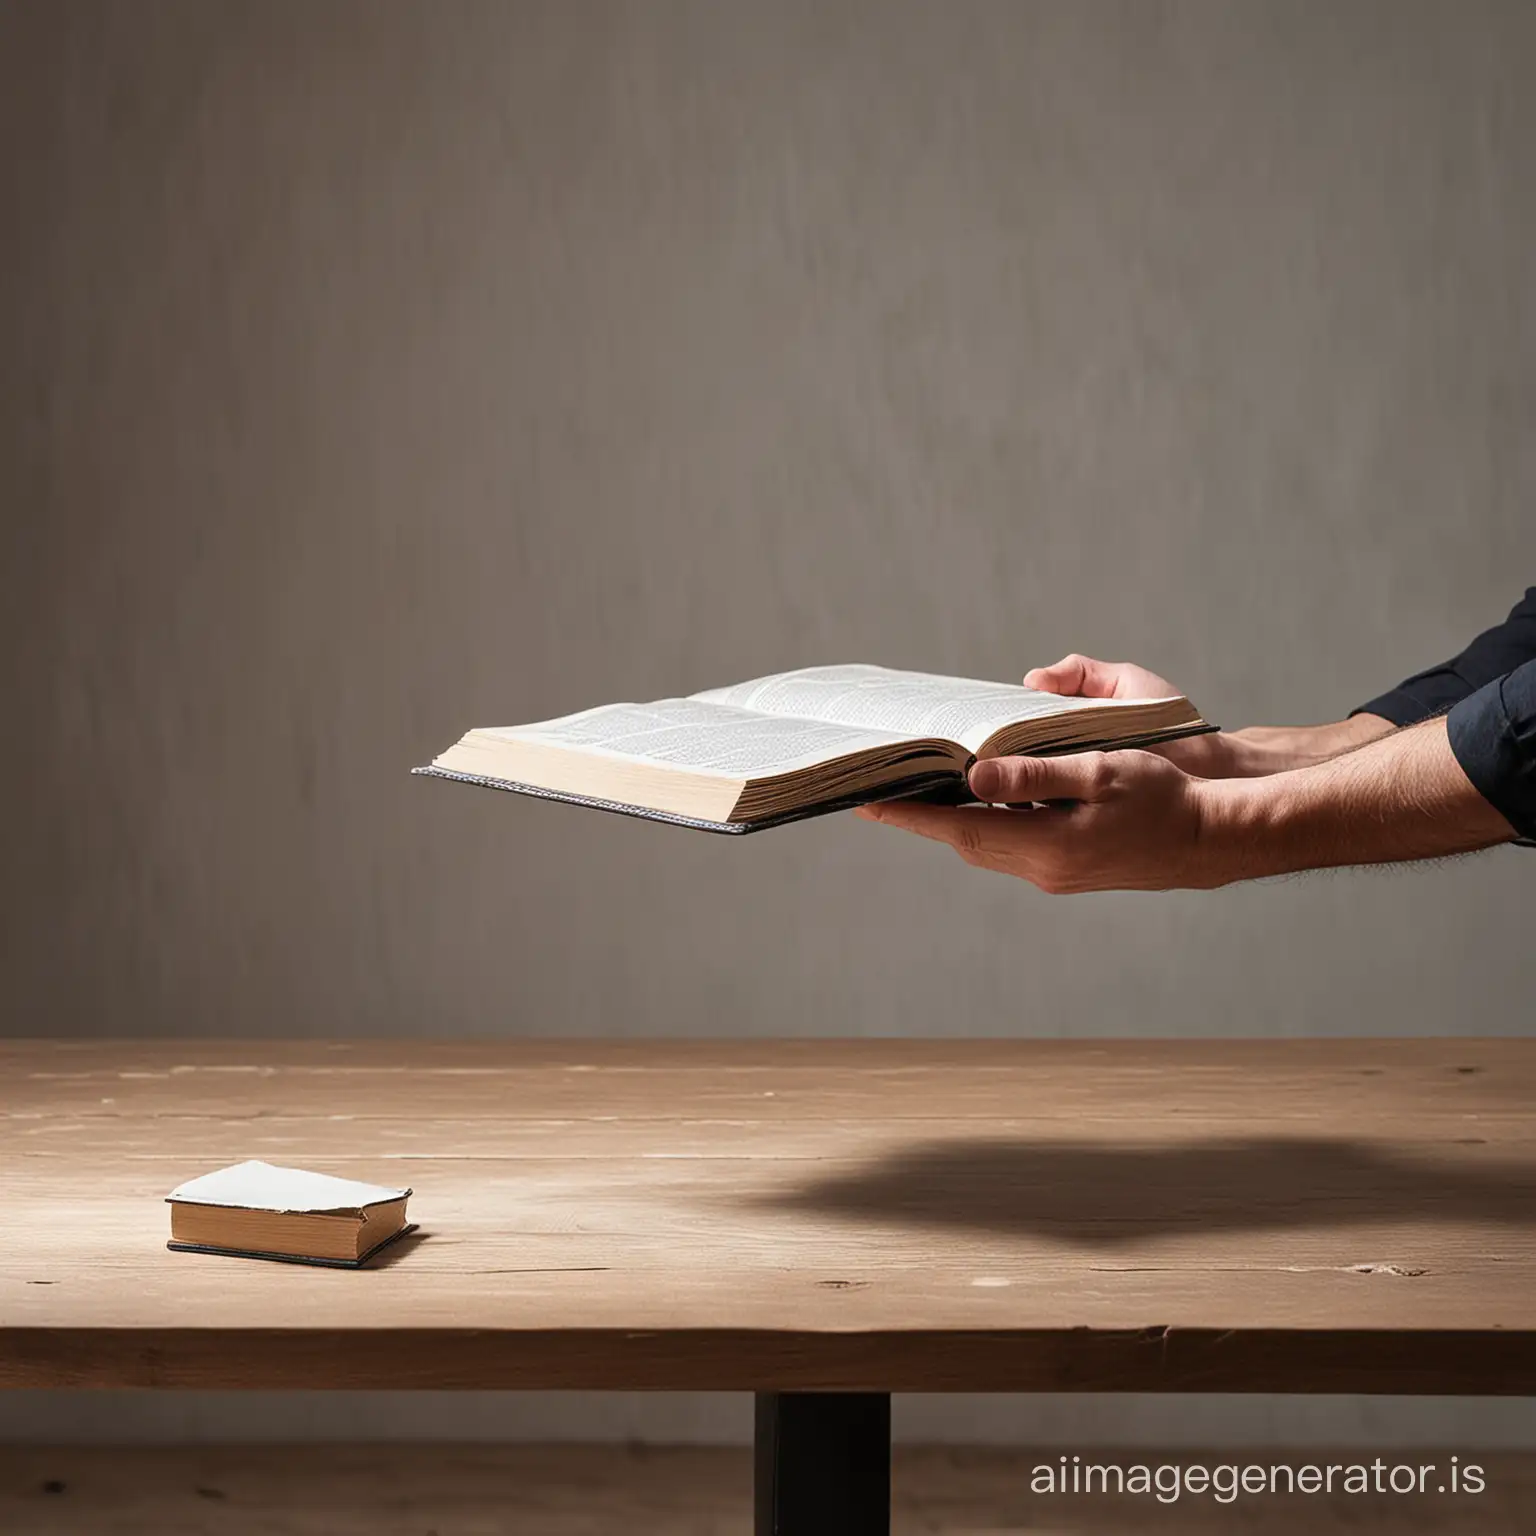 man lifts a book to the tabletop
